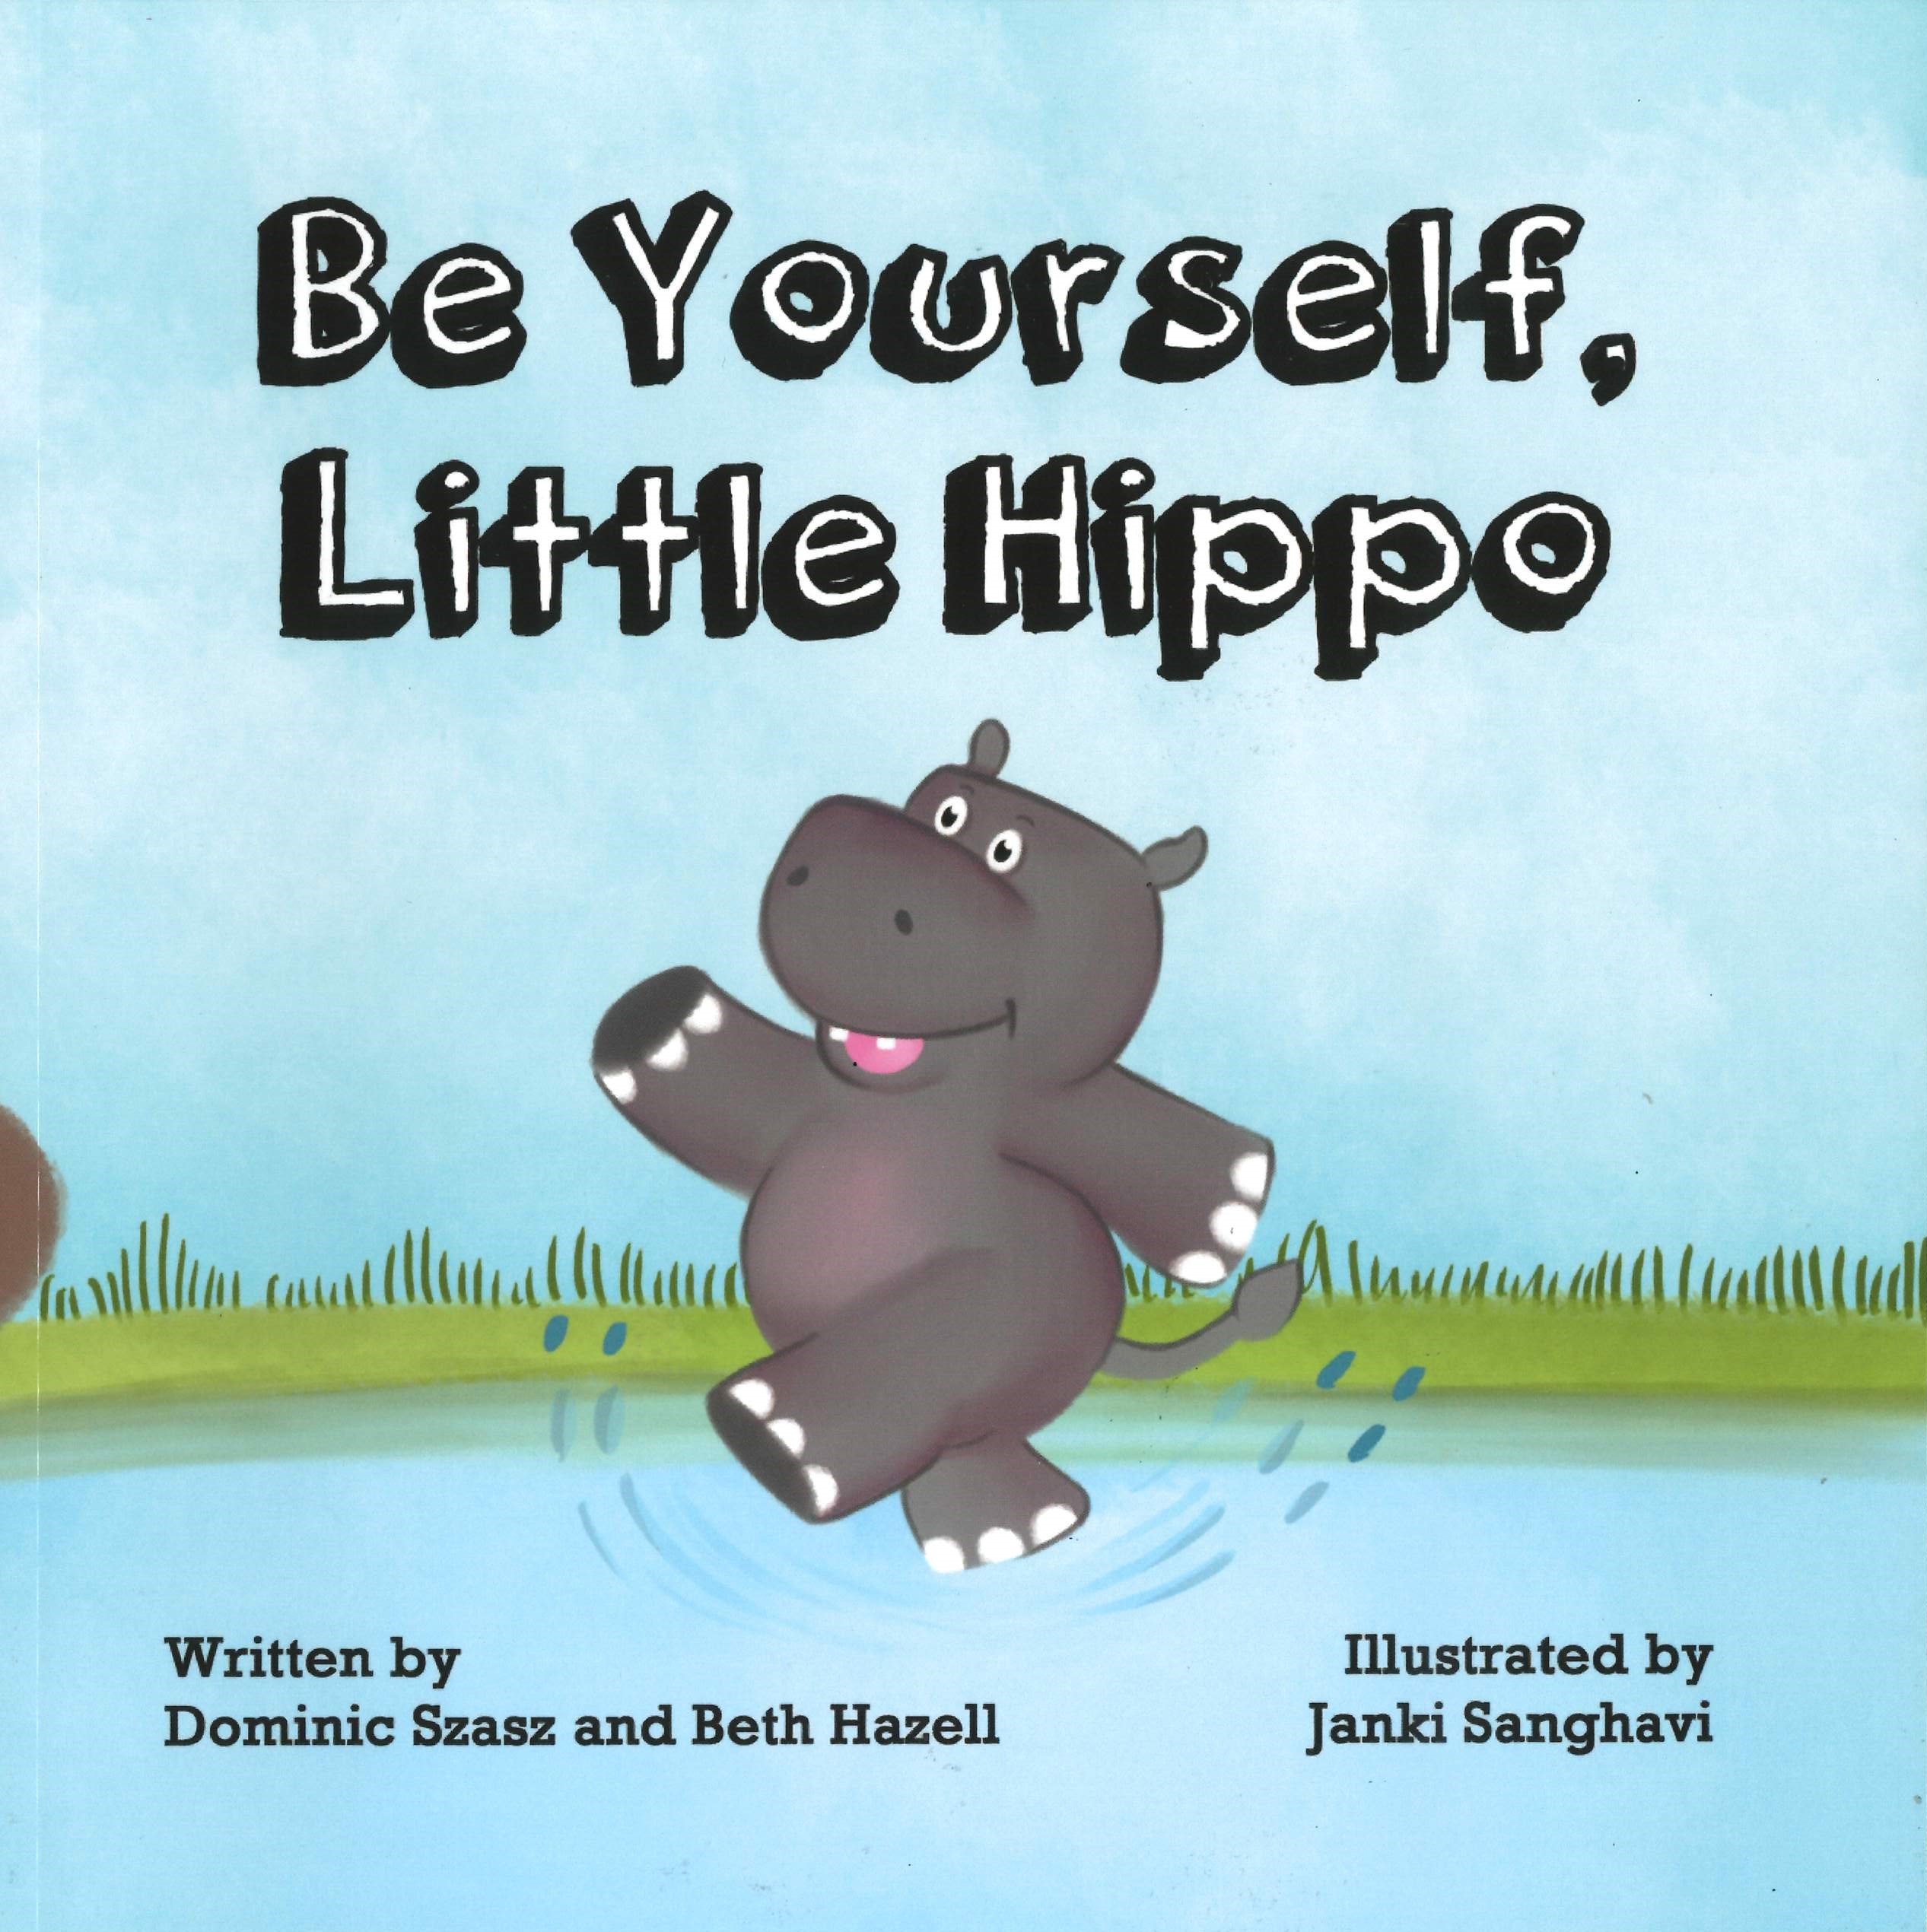 Be Yourself, Little Hippo